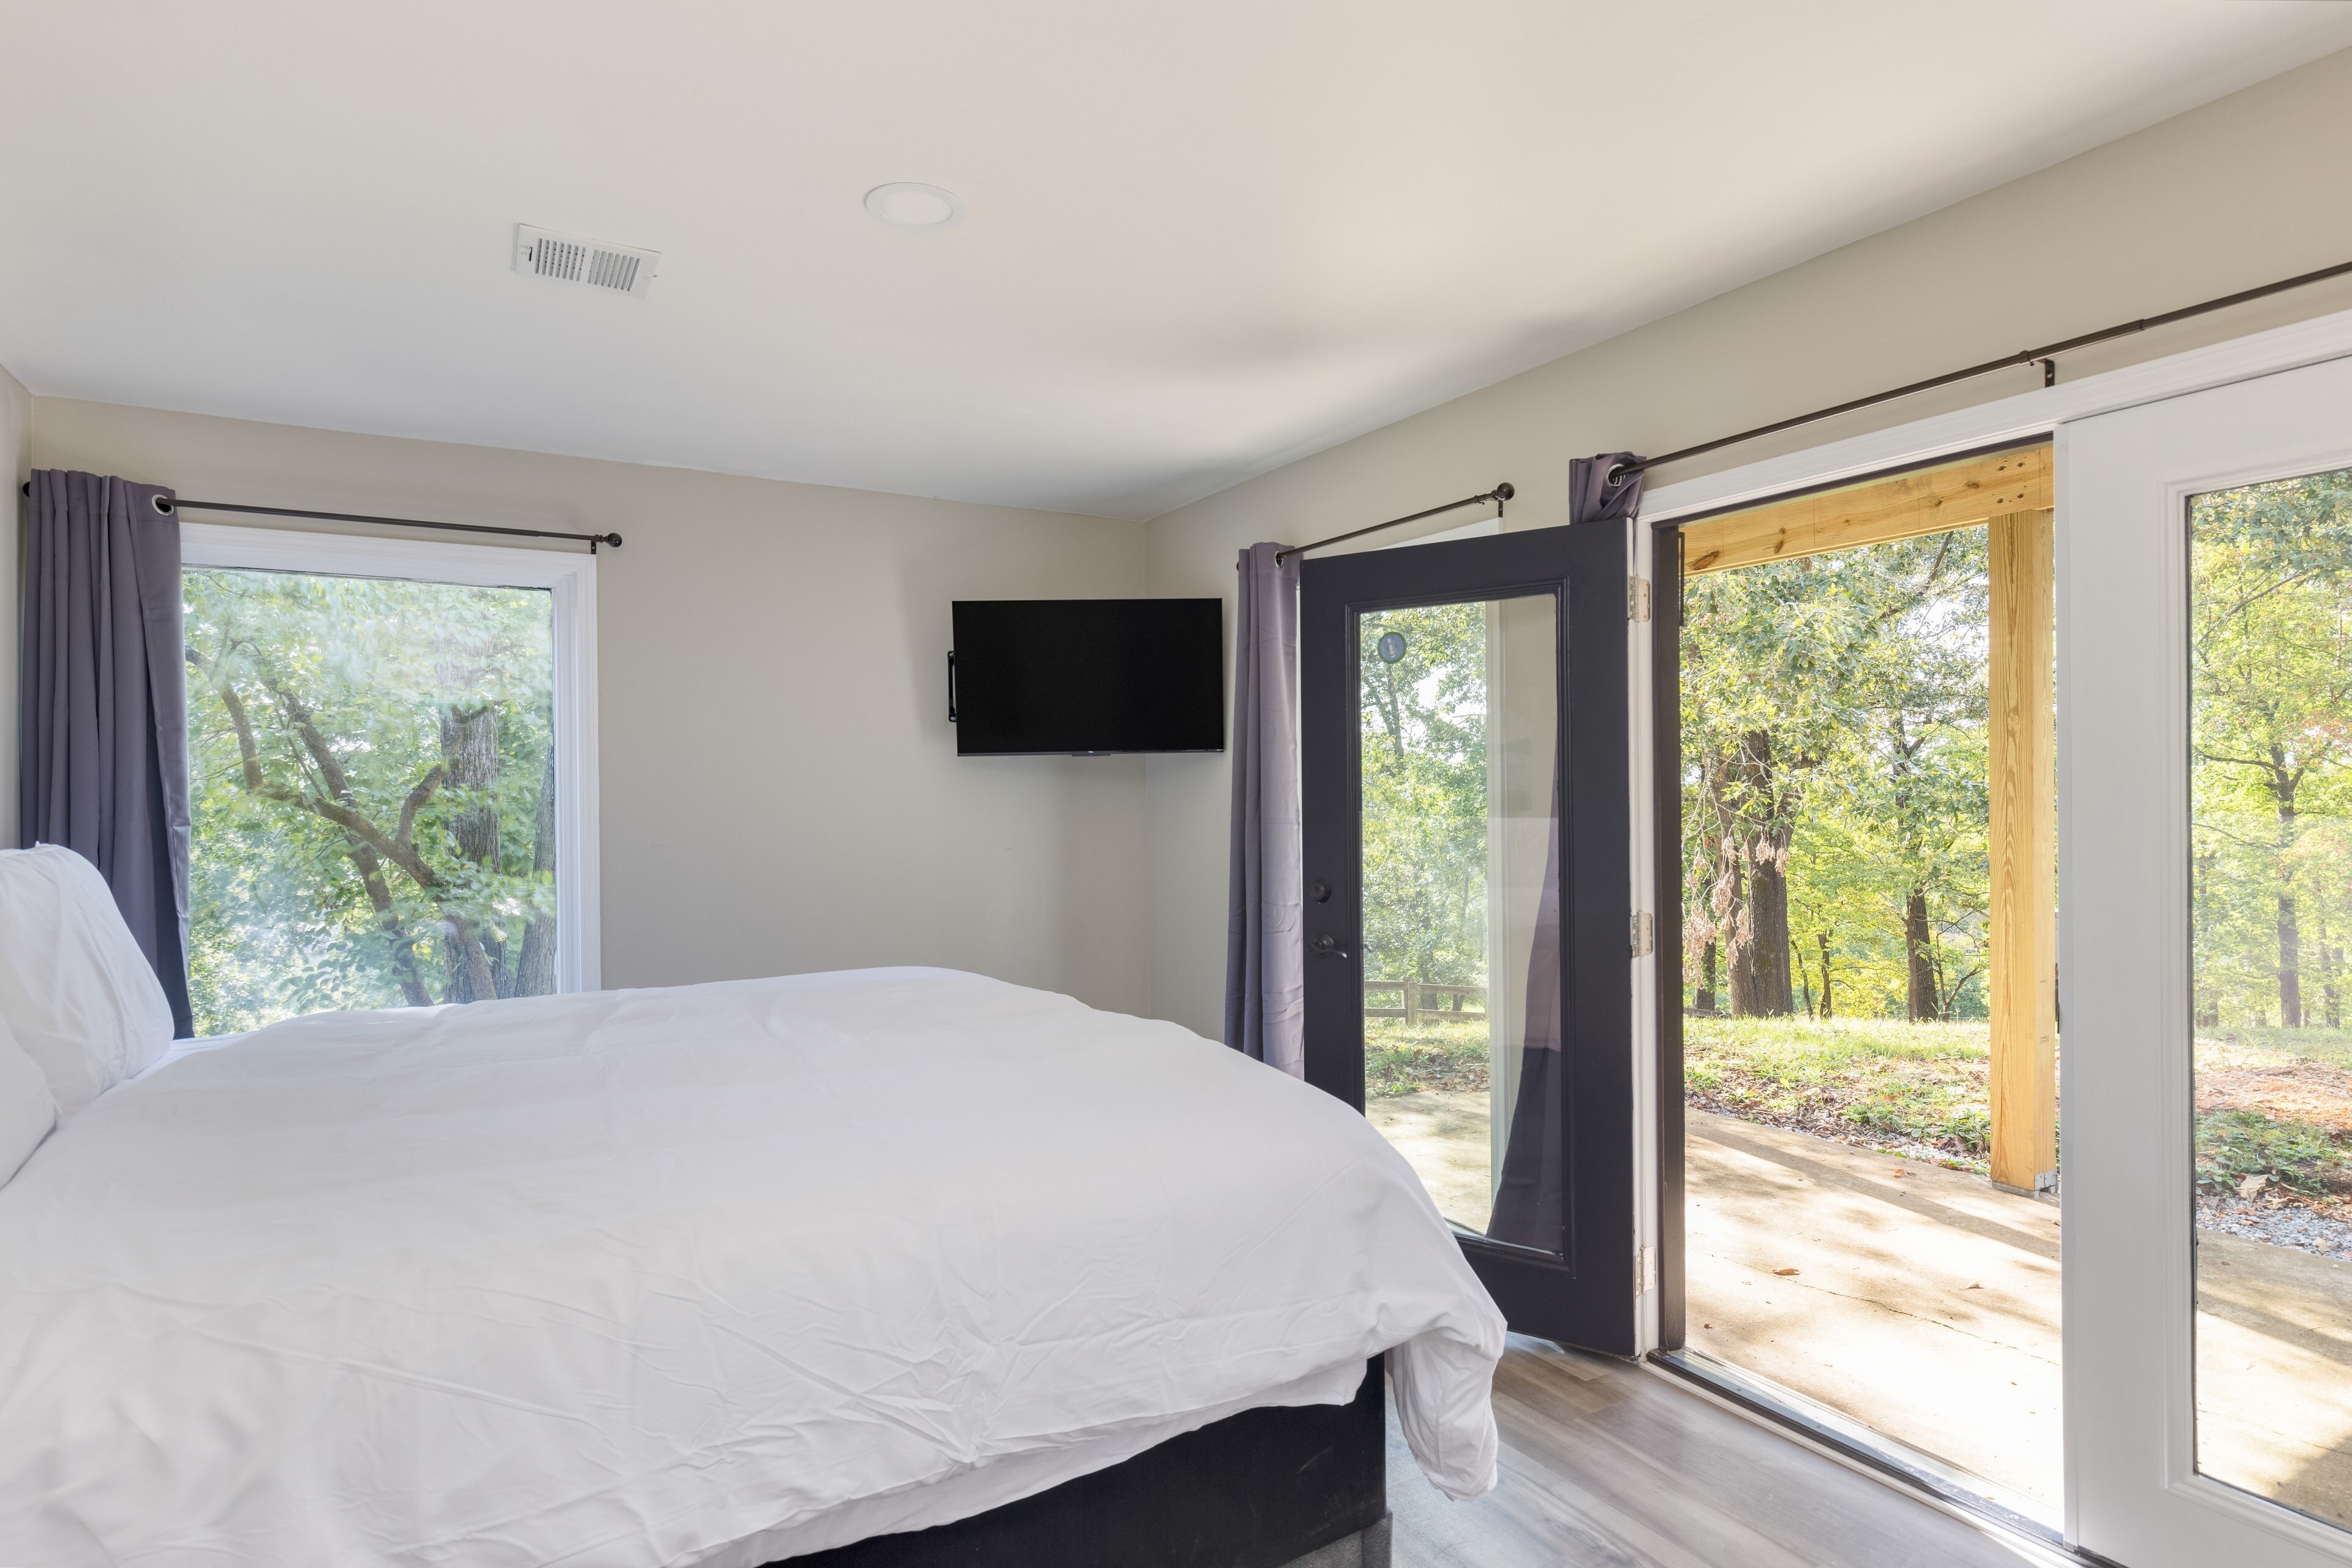 Bedroom 3 features a queen bed, TV, and outdoor access.